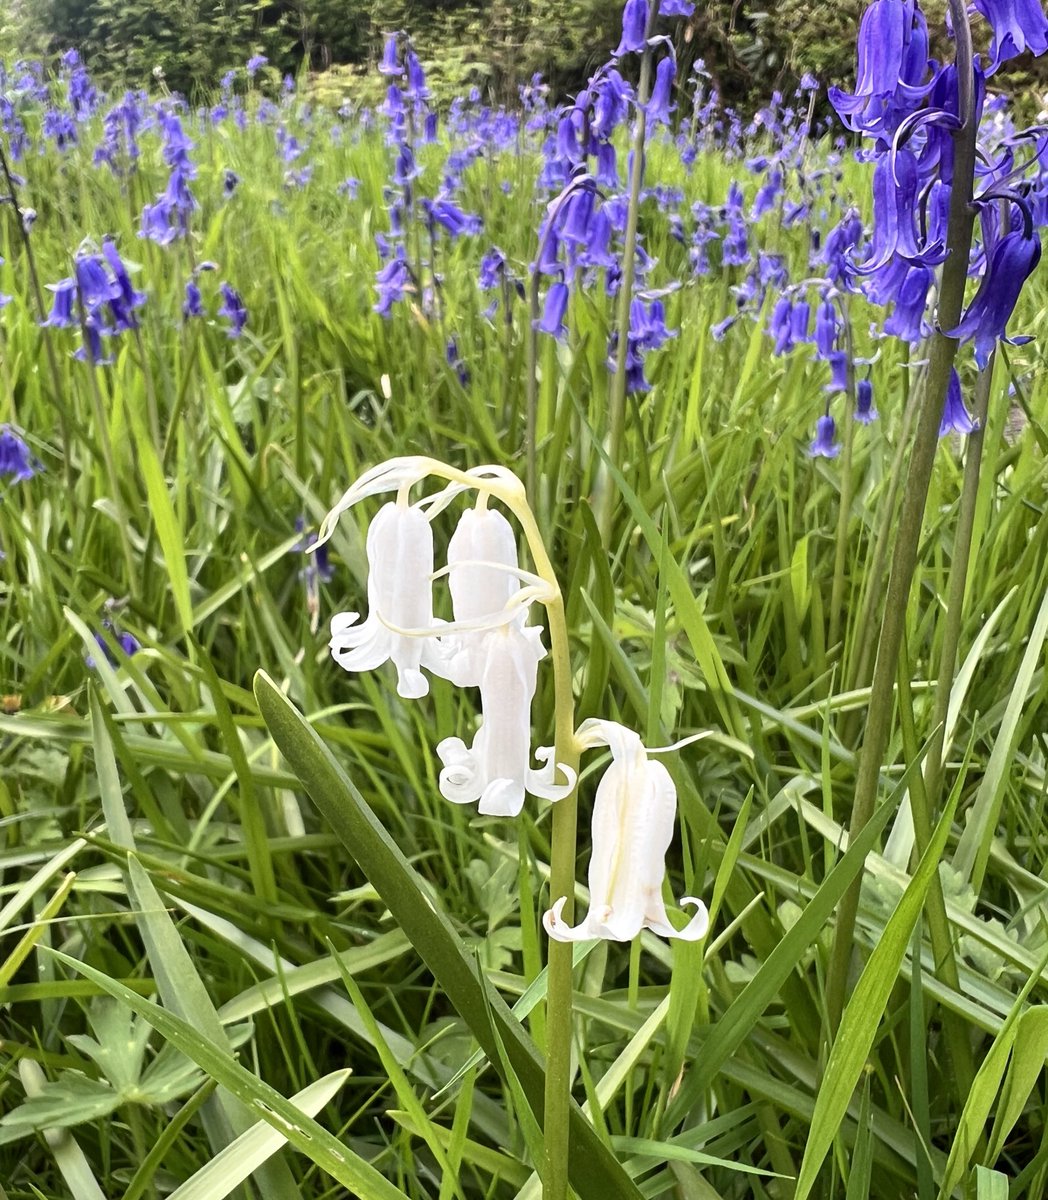 Happy #May1st with blue and white bluebells flowering @bordehillgarden

#MayDay #may24 #woodland #bluebells #visitsussex